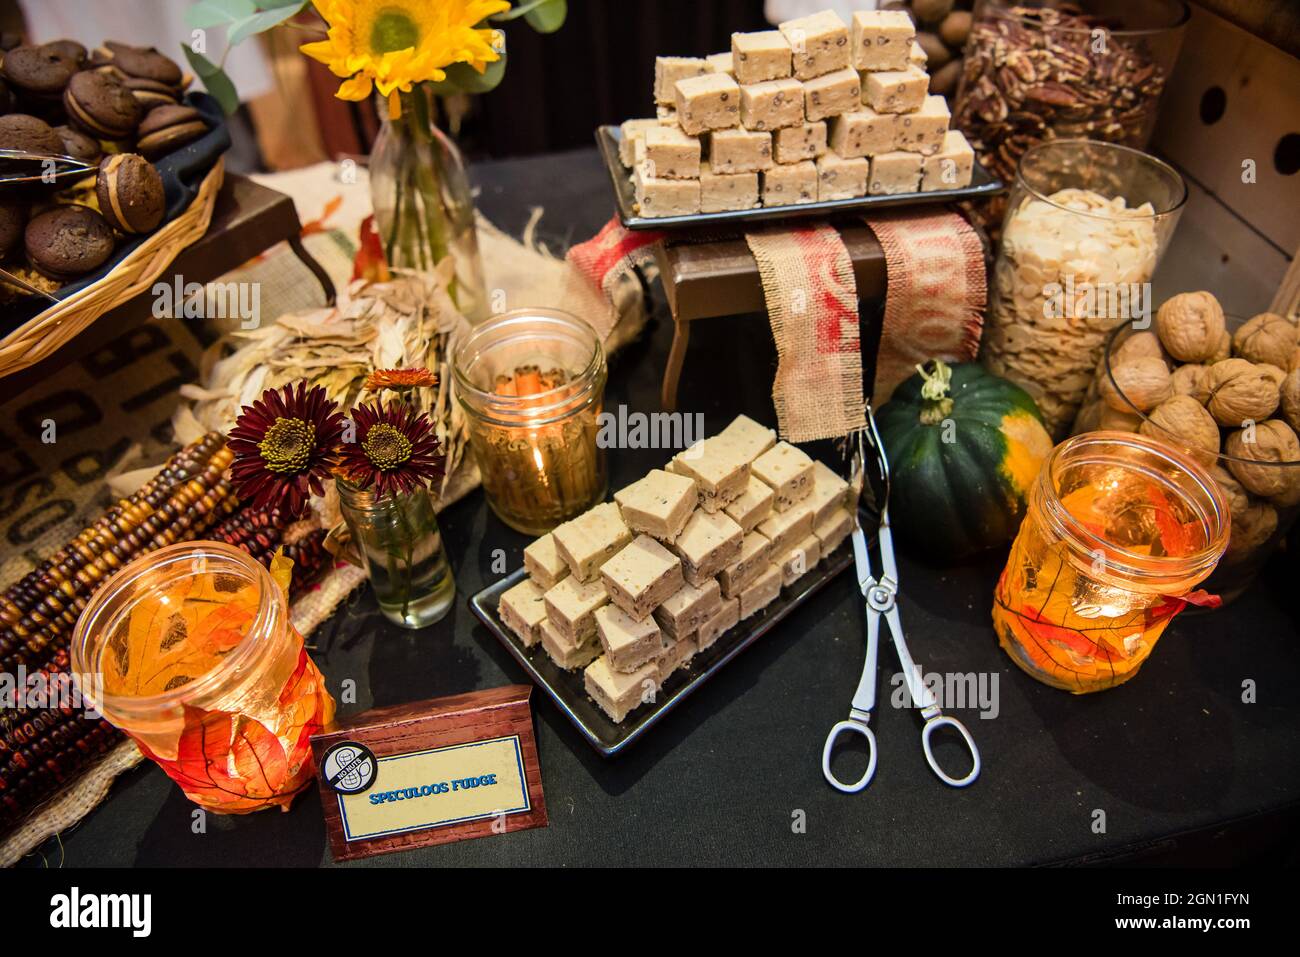 Autumn food spread with fudge flowers and leaf decor. Stock Photo